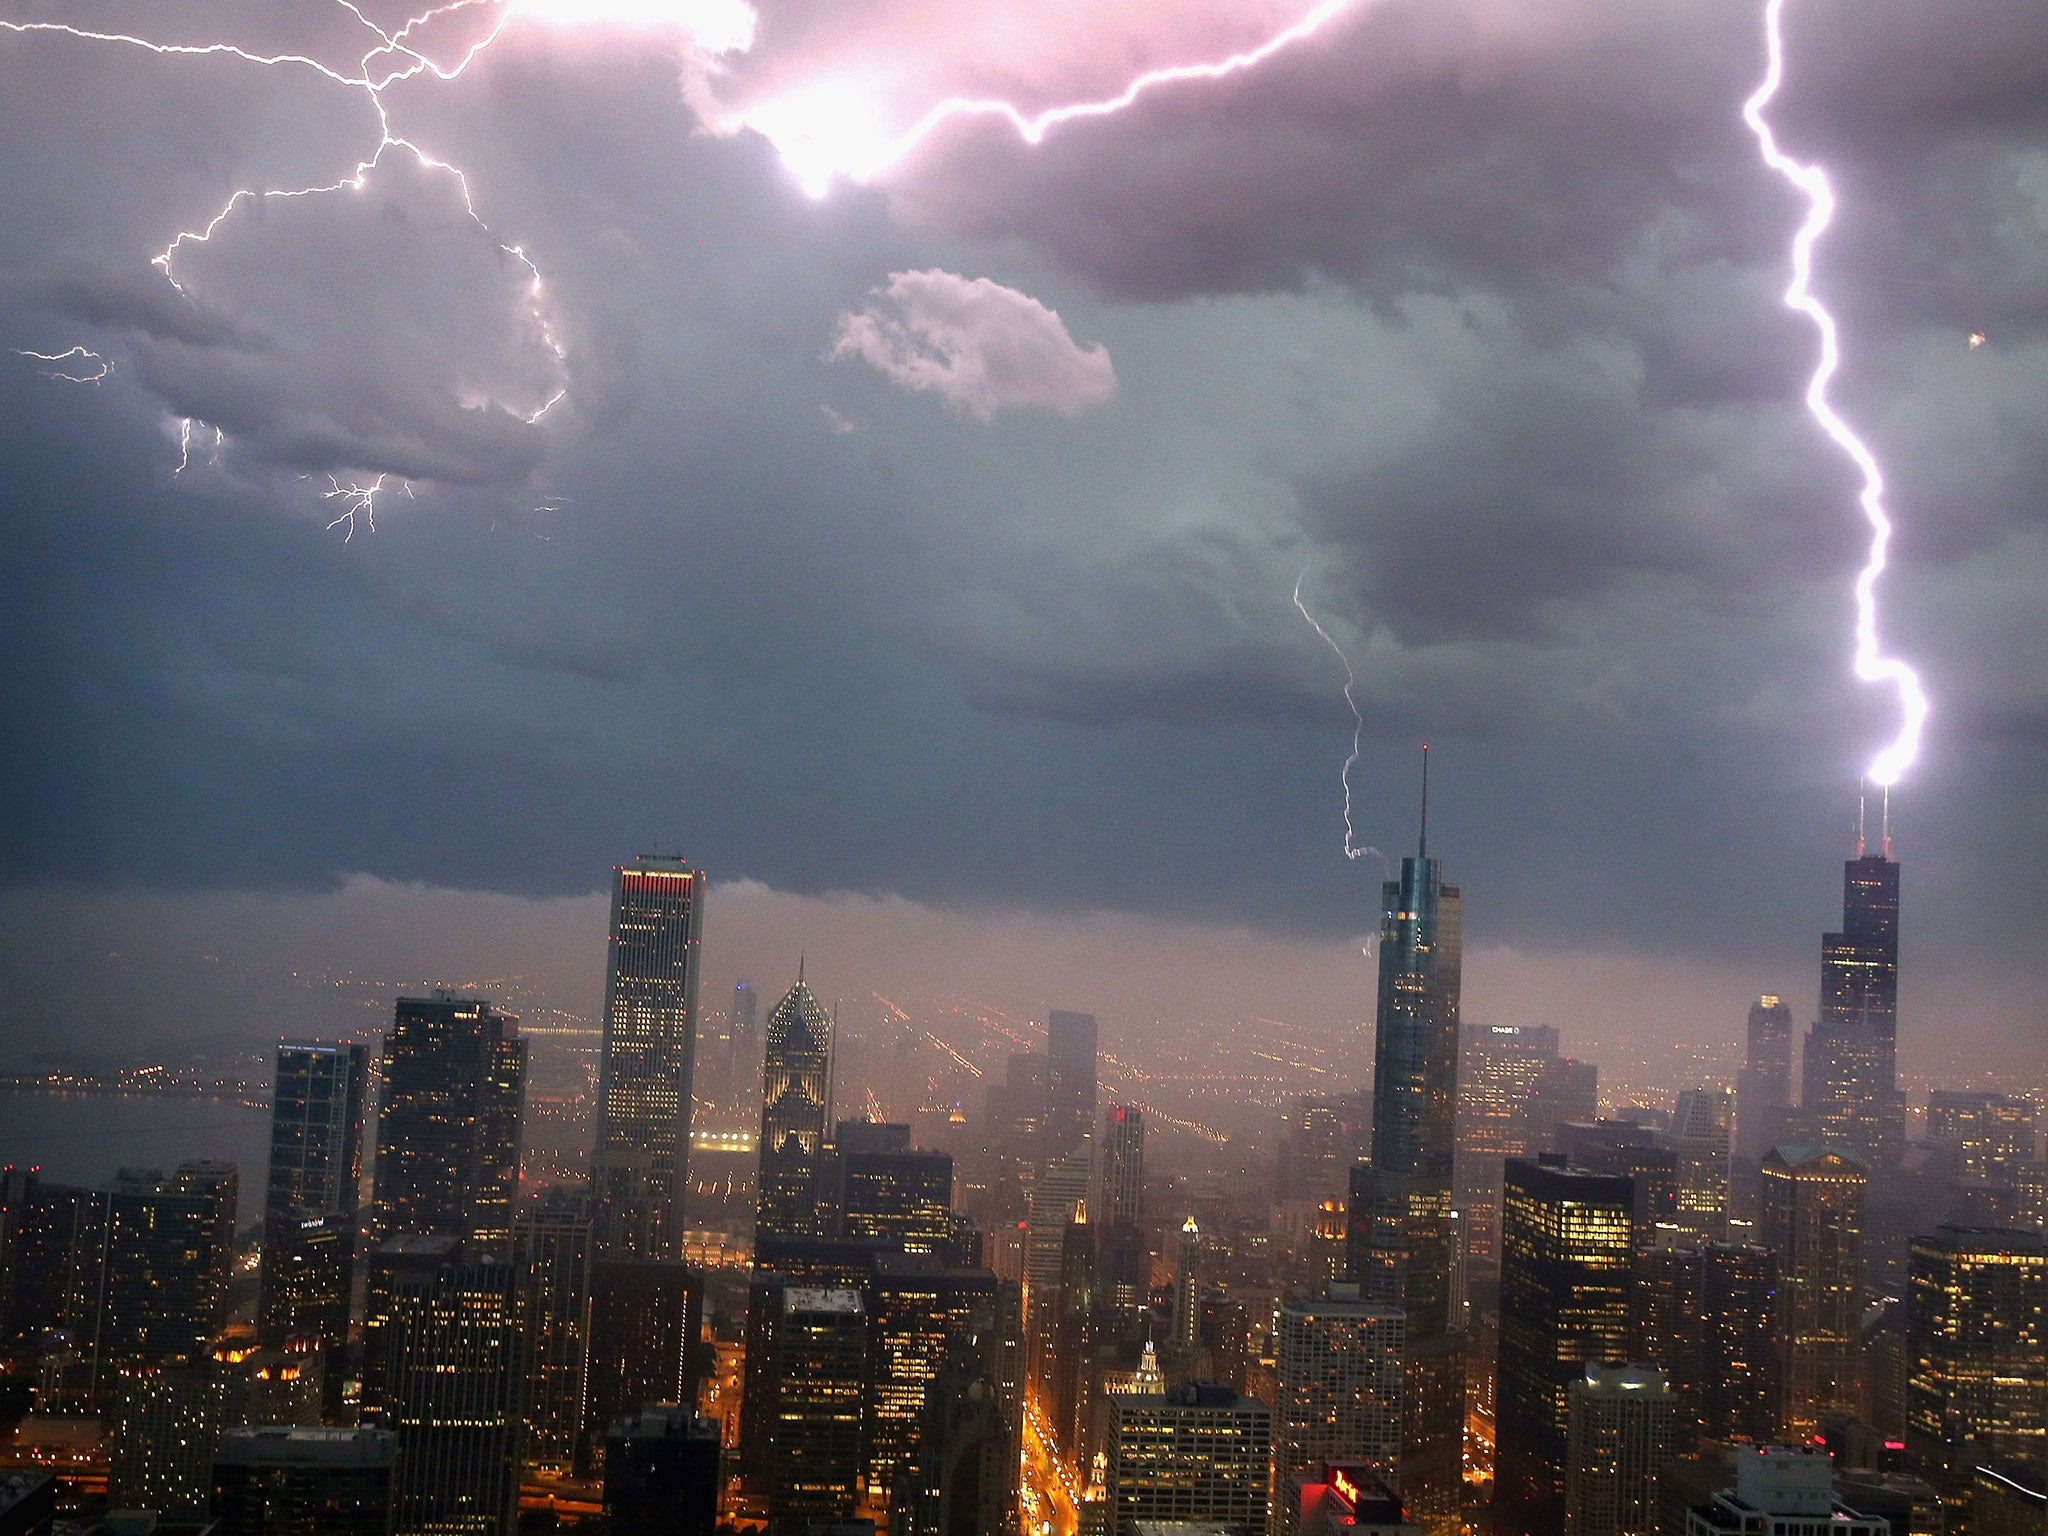 Pictures of lightning striking buildings may be illegal under United Arab Emirates cybercrime laws